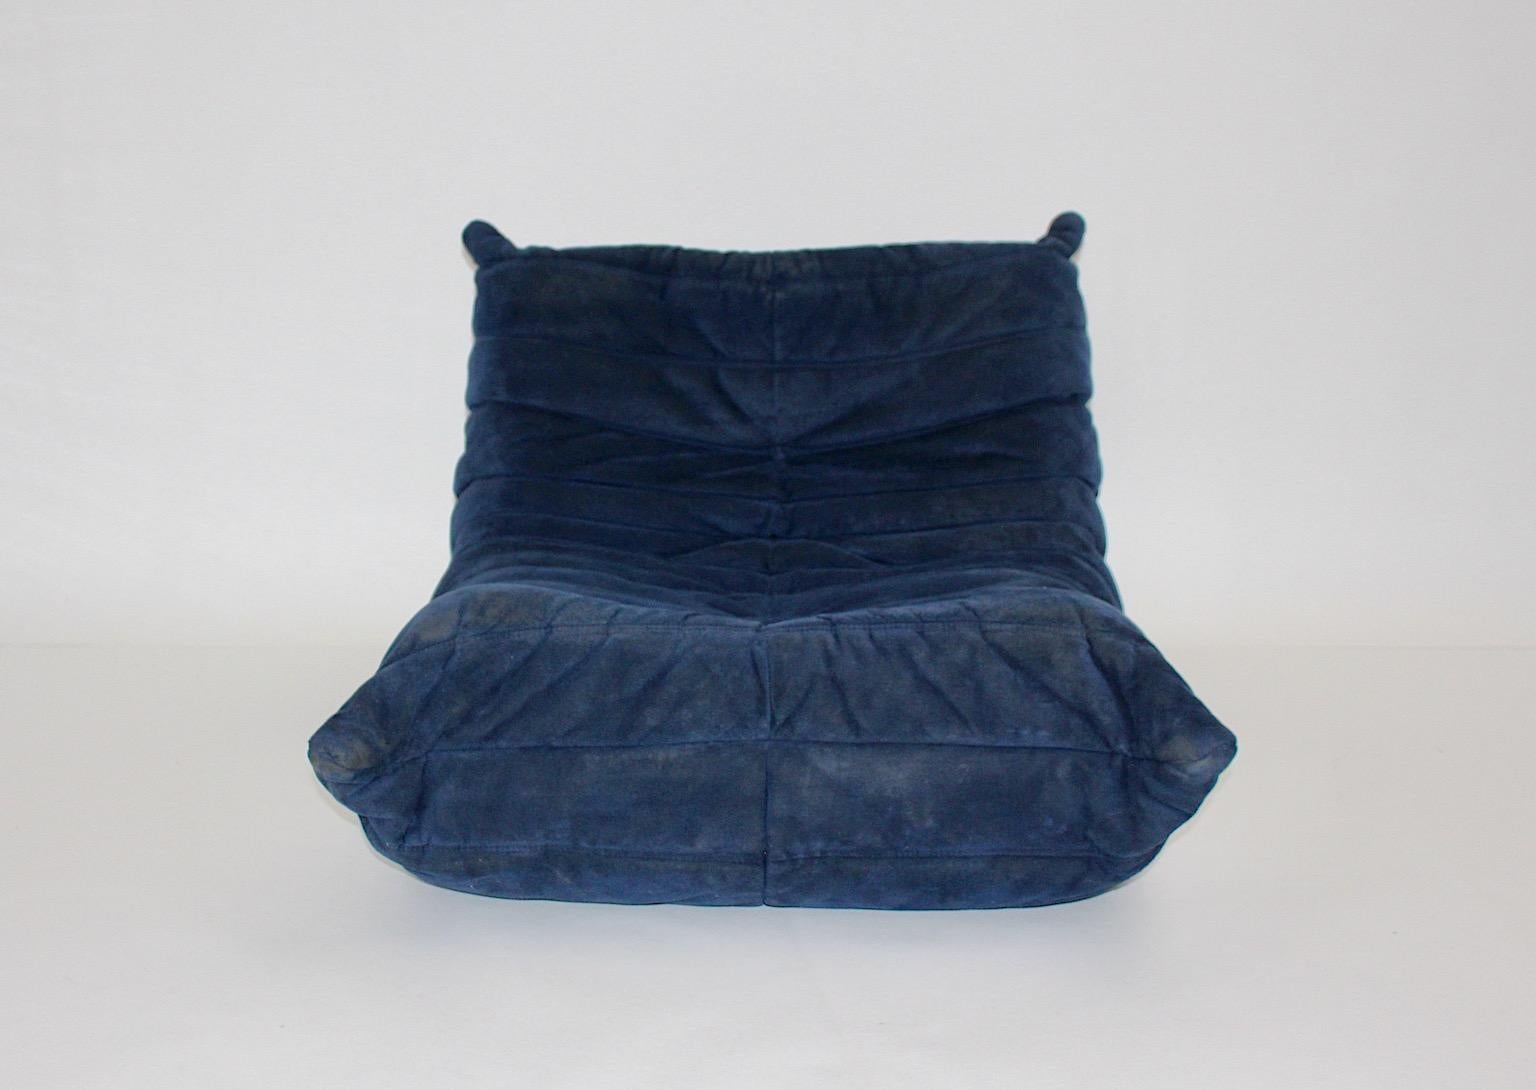 Modern authentic vintage one seater or lounge chair by Michel Ducaroy for Ligne Roset 1970s France.
An iconic modular freestanding lounge chair or chair element from ultra suede Alcantara in wonderful cornflower blue color tone, which shows